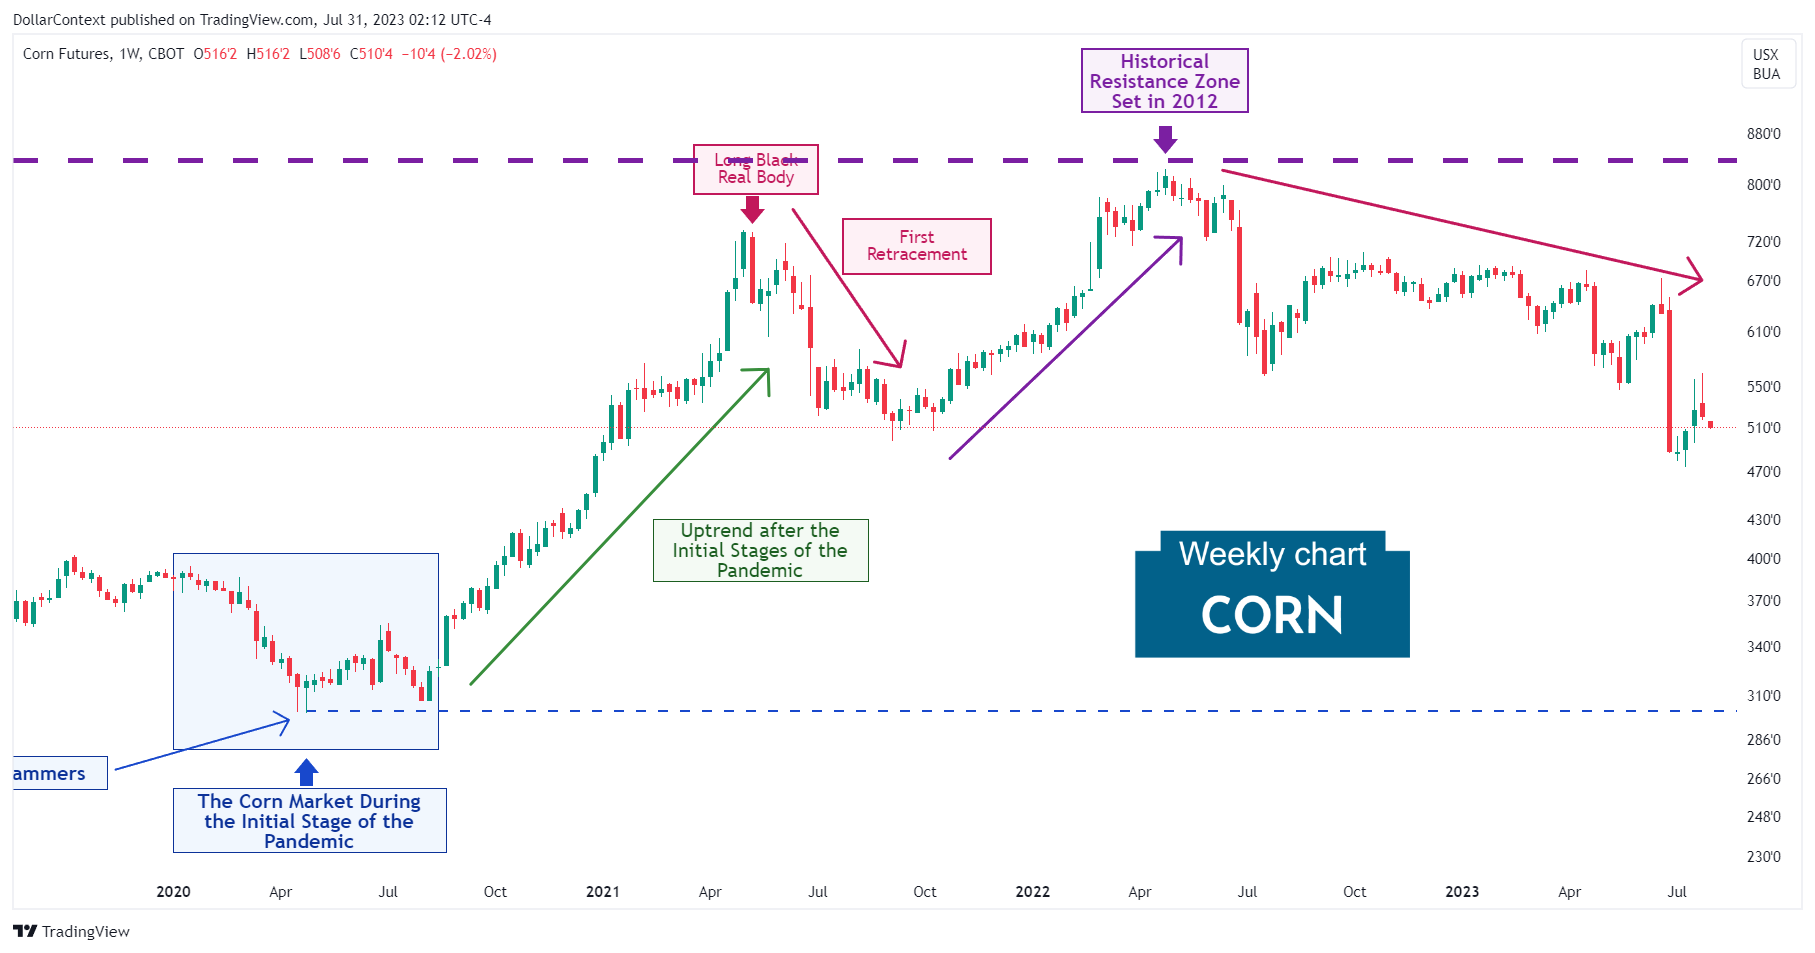 Corn Futures: A Second Correction Starting in May 2022